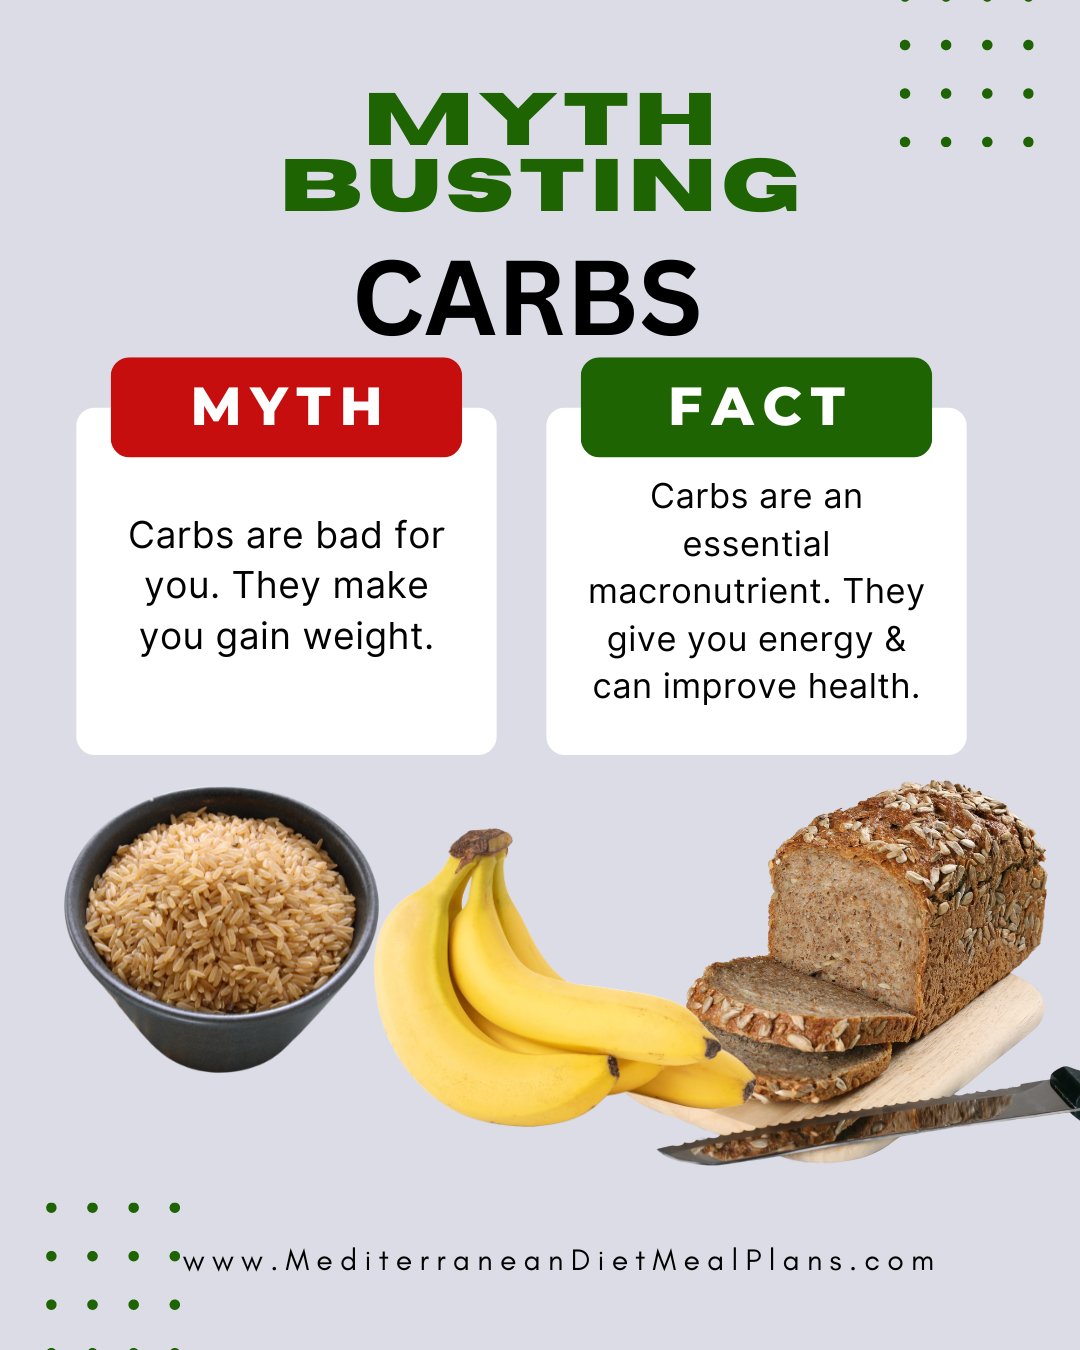 Finally, the truth about Carbs.